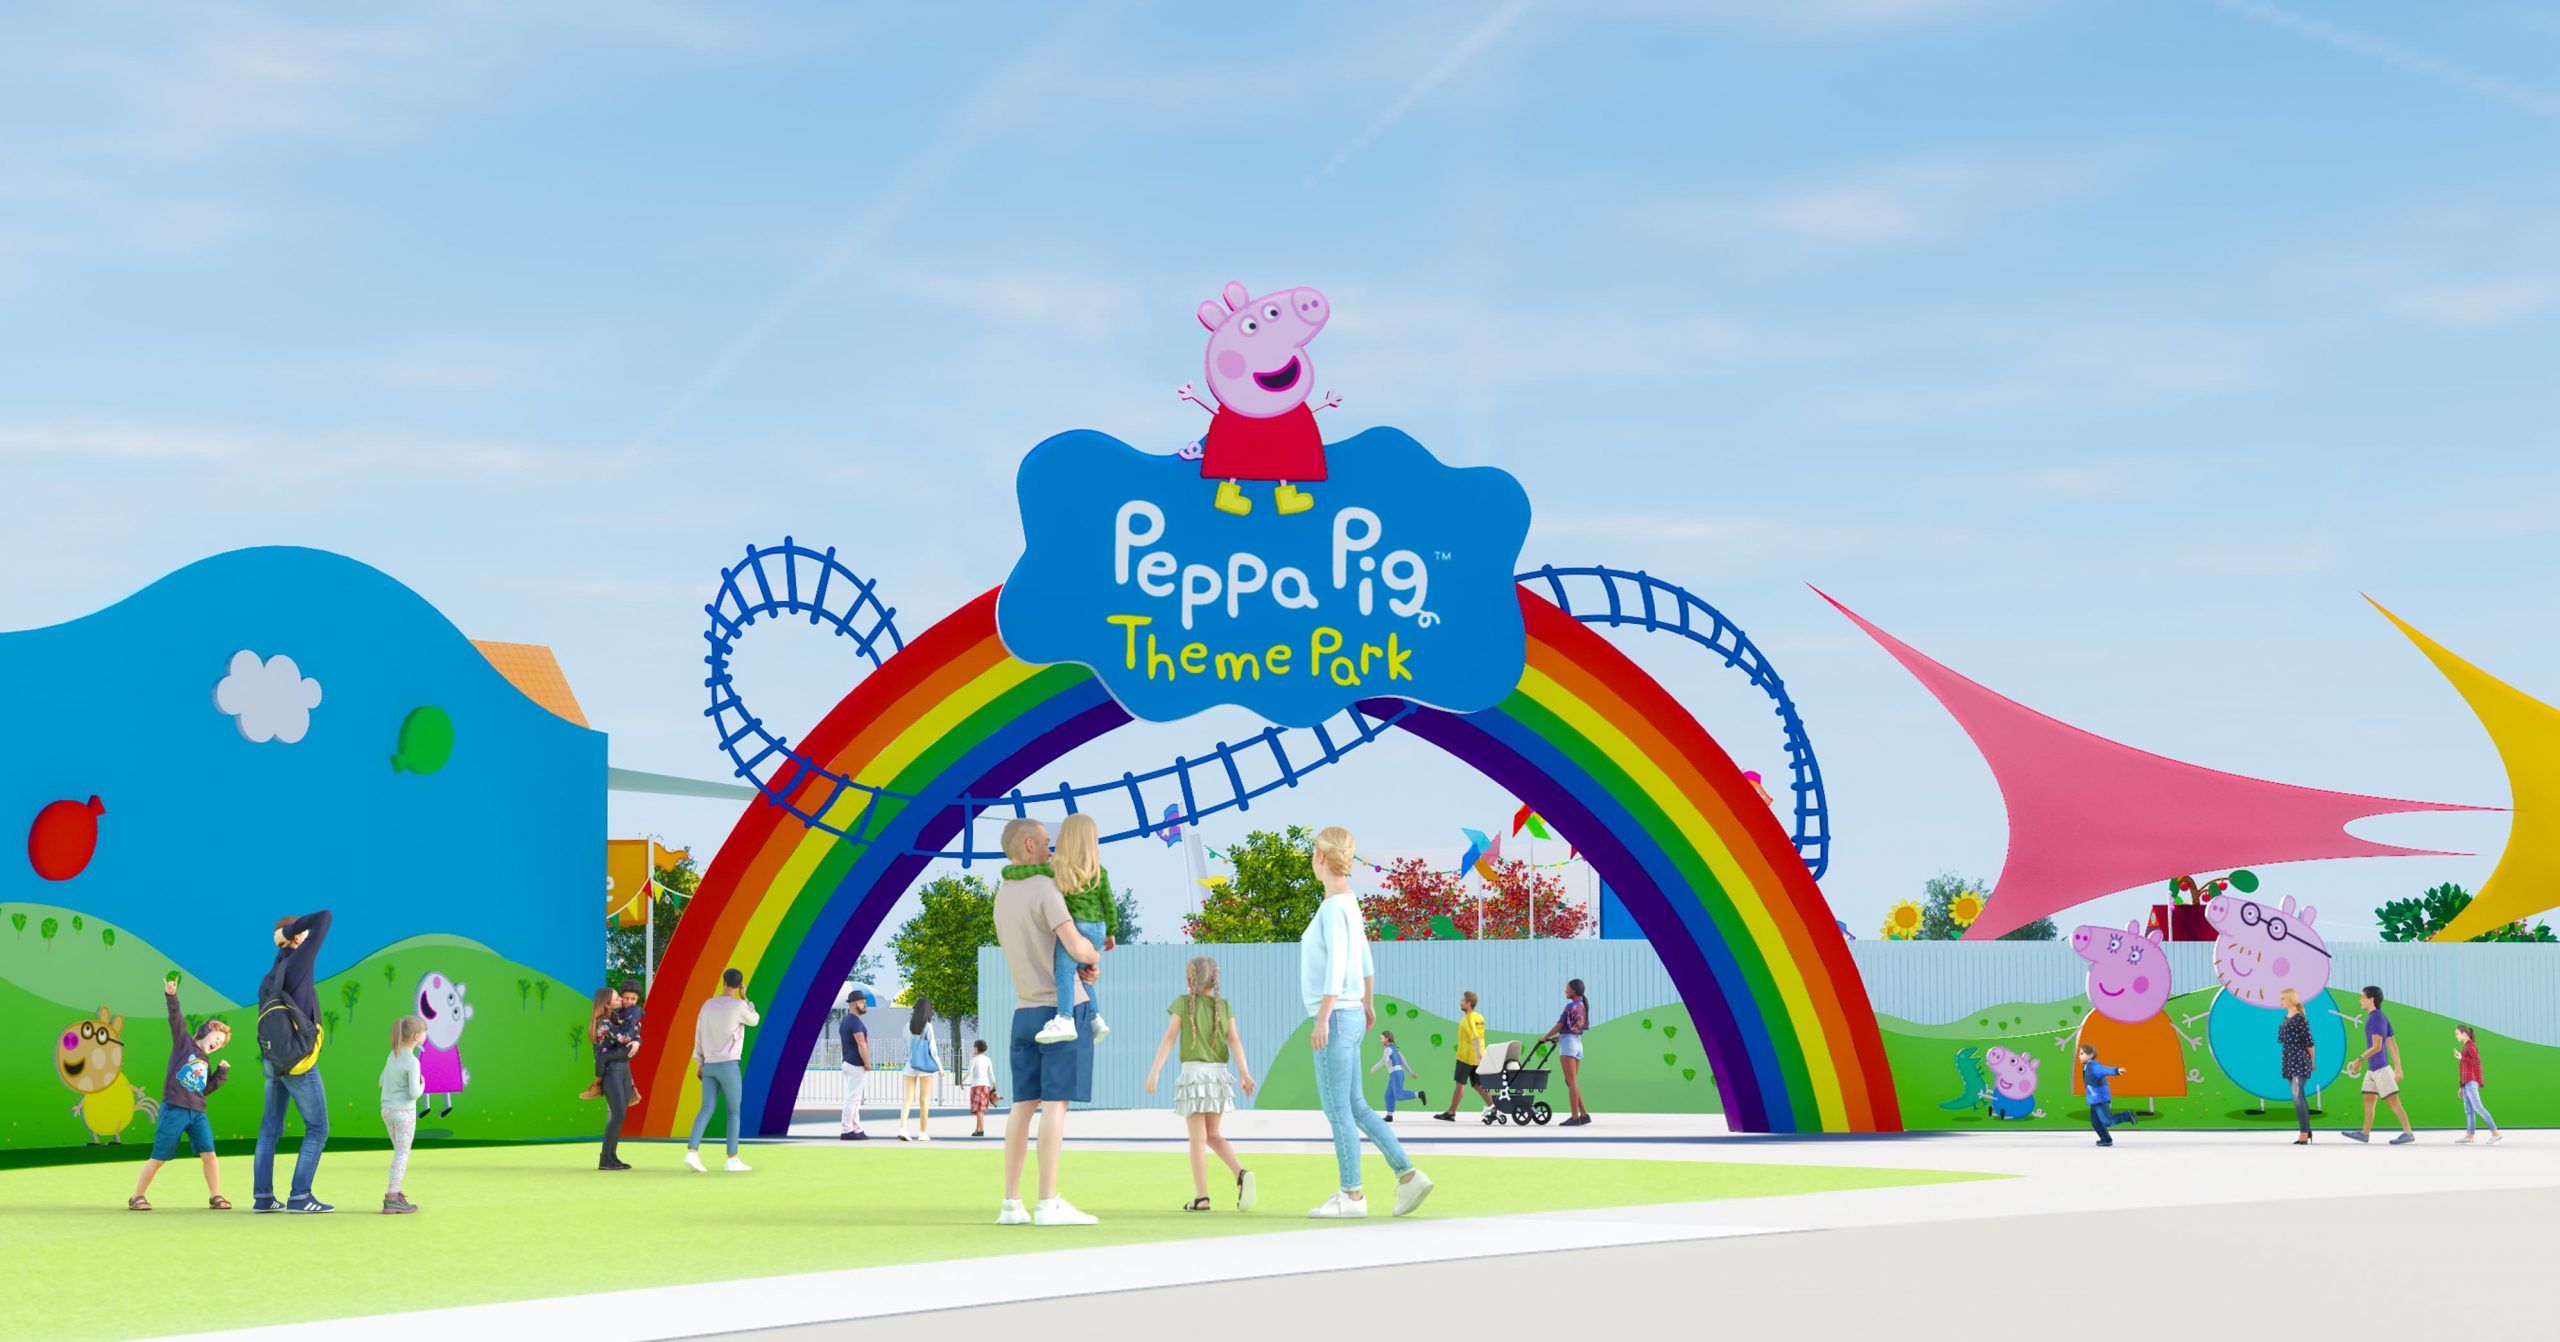 Peppa Pig Theme Park to open as Certified Autism Center at LEGOLAND Florida Resort